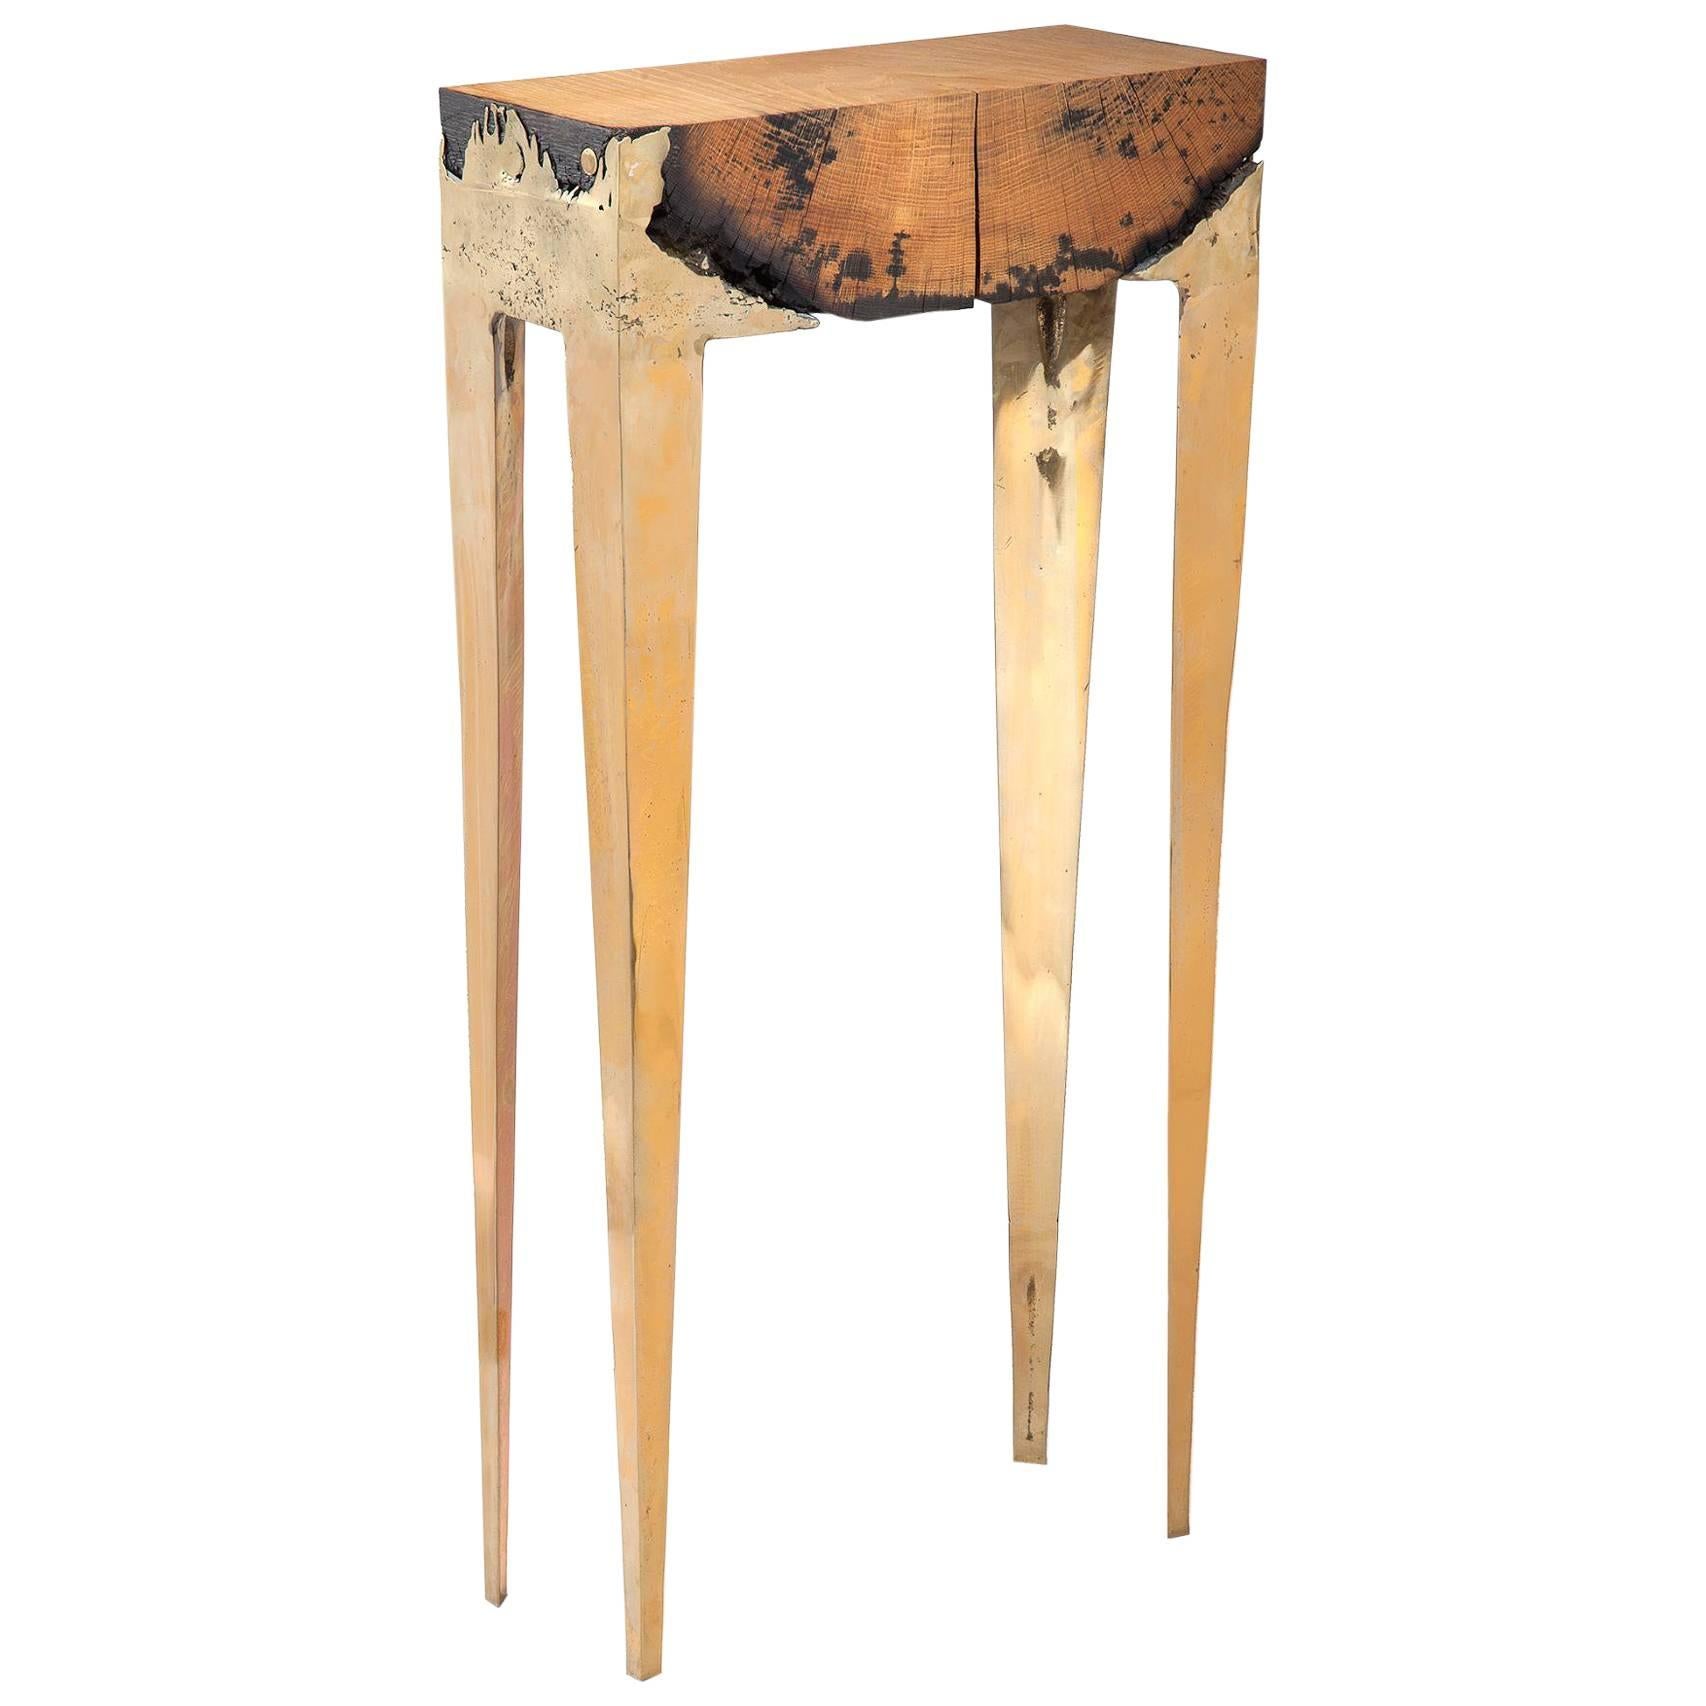 Wood Casting 'Tm' Short Console i (Brass and Wood) by Hilla Shamia